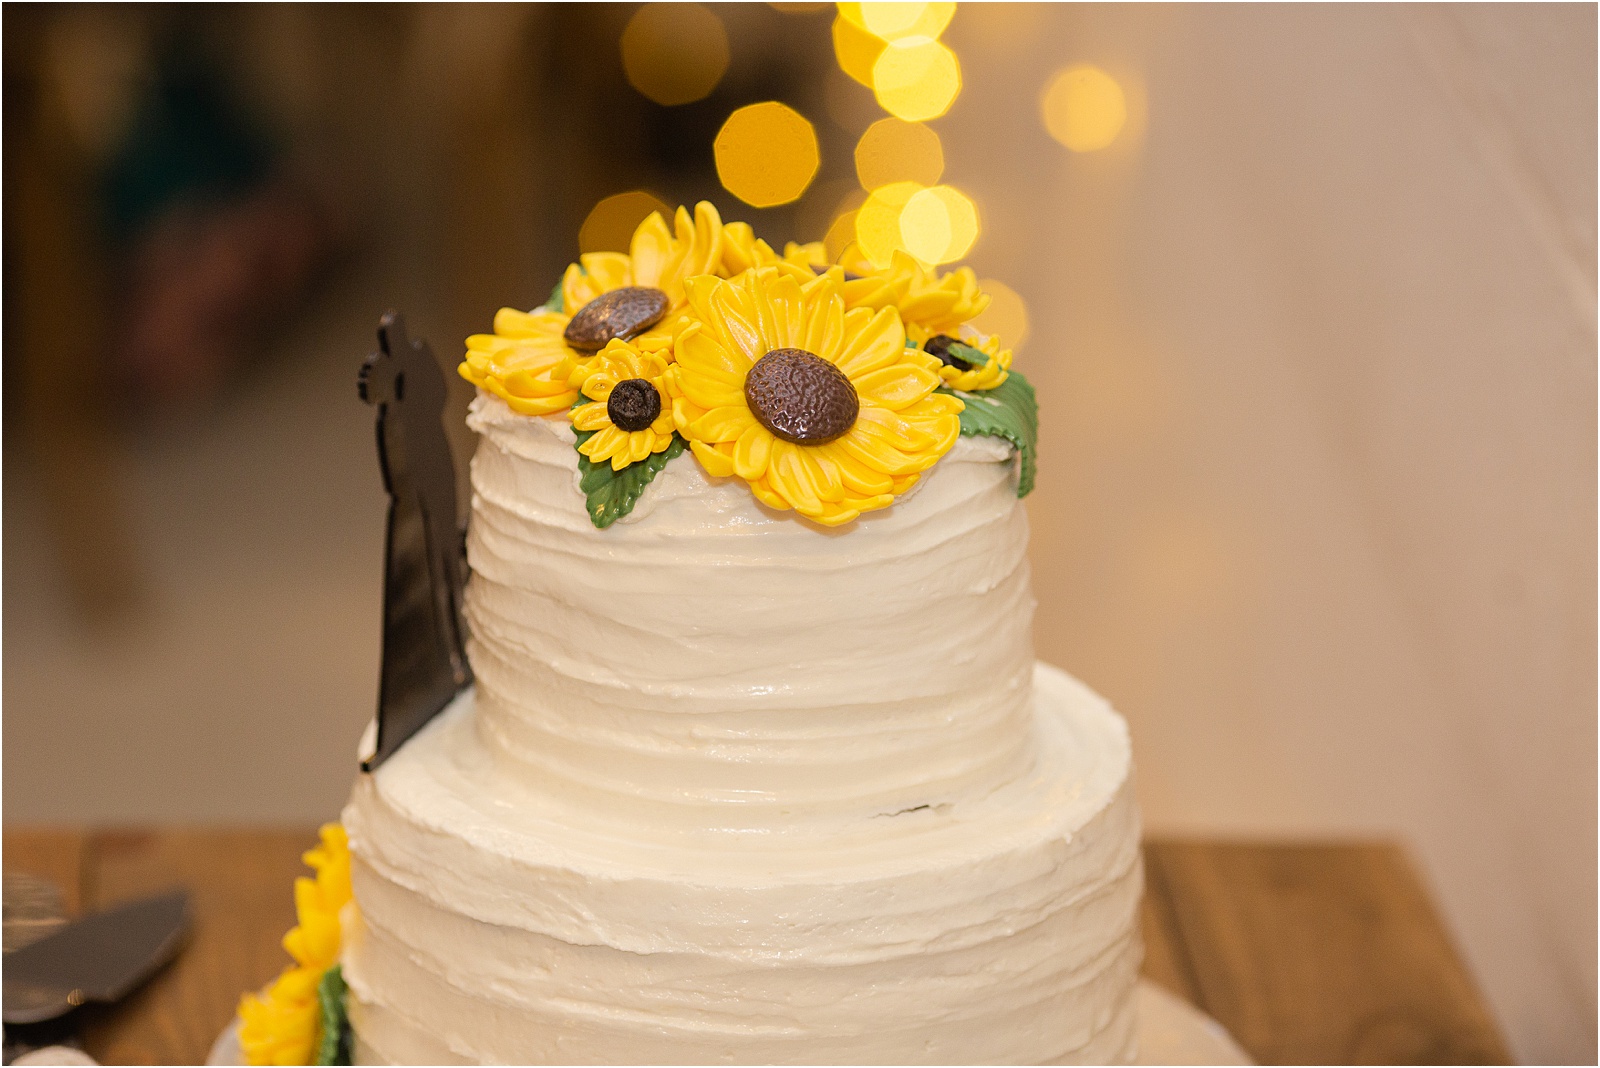 Wedding cake decorated with yellow sunflowers